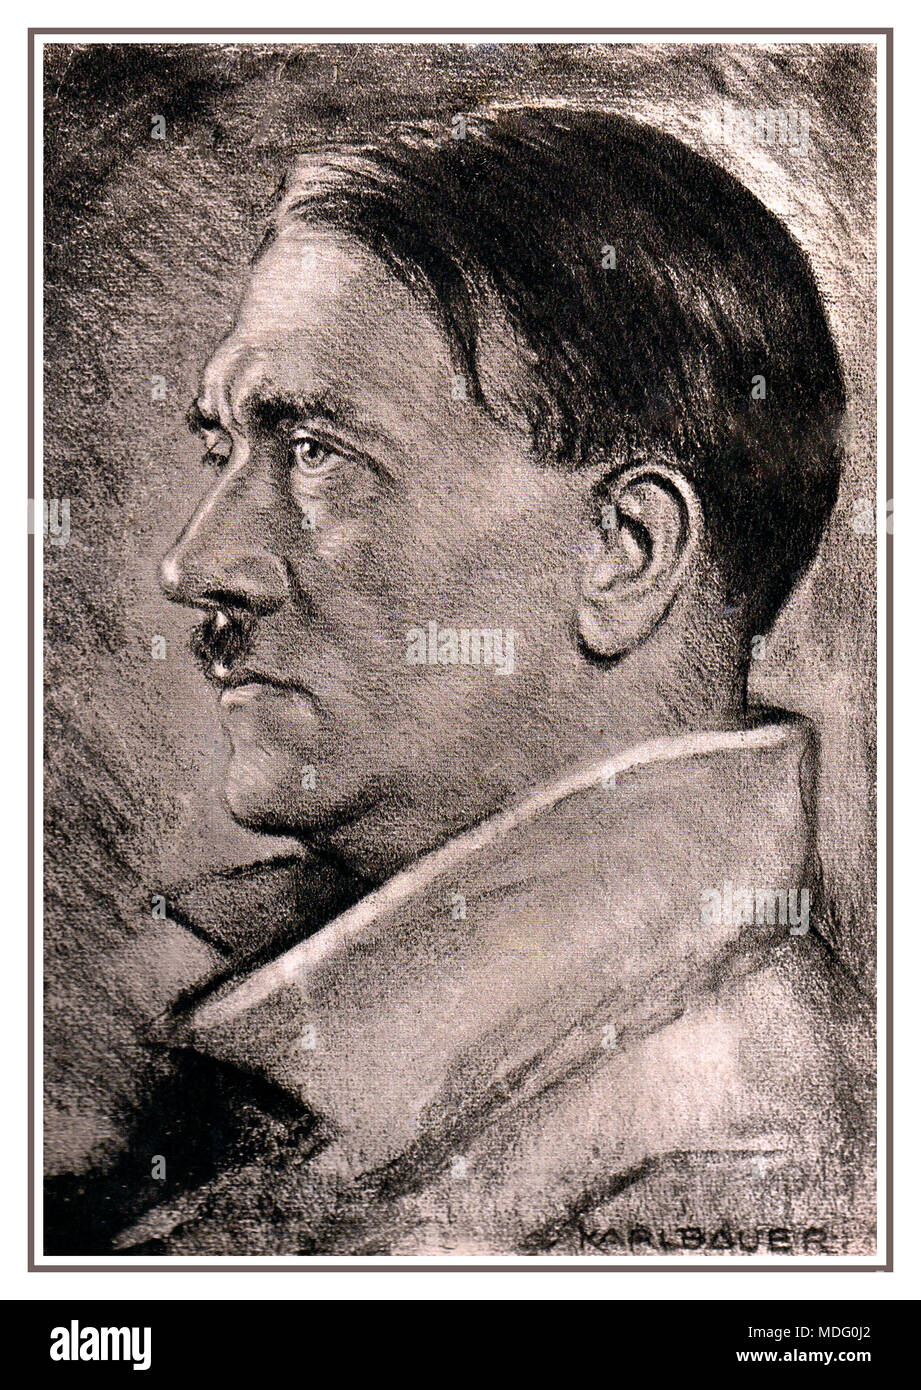 Portrait of Adolf Hitler 1938 by Karl Bauer (1868-1942) During the time of National Socialism Bauer made several portraits of Adolf Hitler. For this he was awarded the Goethe Medal for Art and Science by Hitler in 1938. Stock Photo